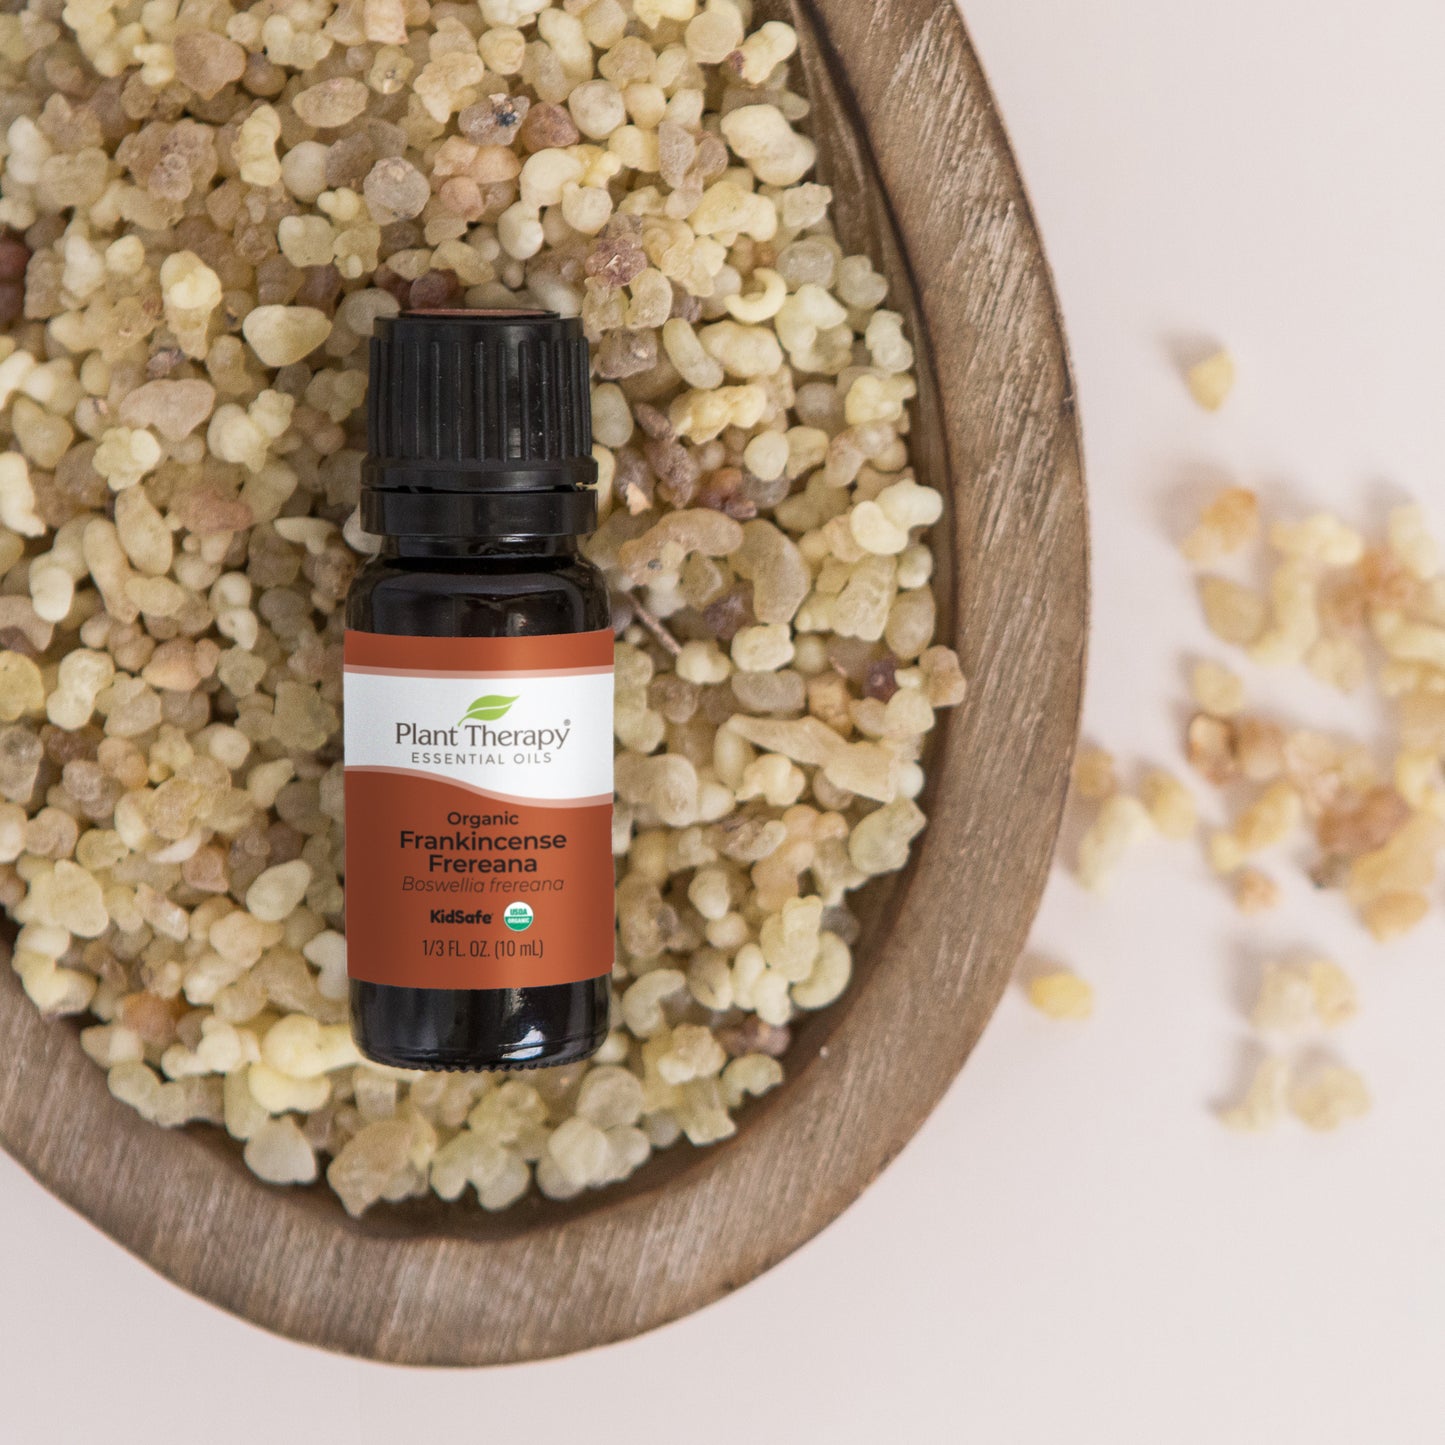 Organic Frankincense Frereana Essential Oil – Plant Therapy